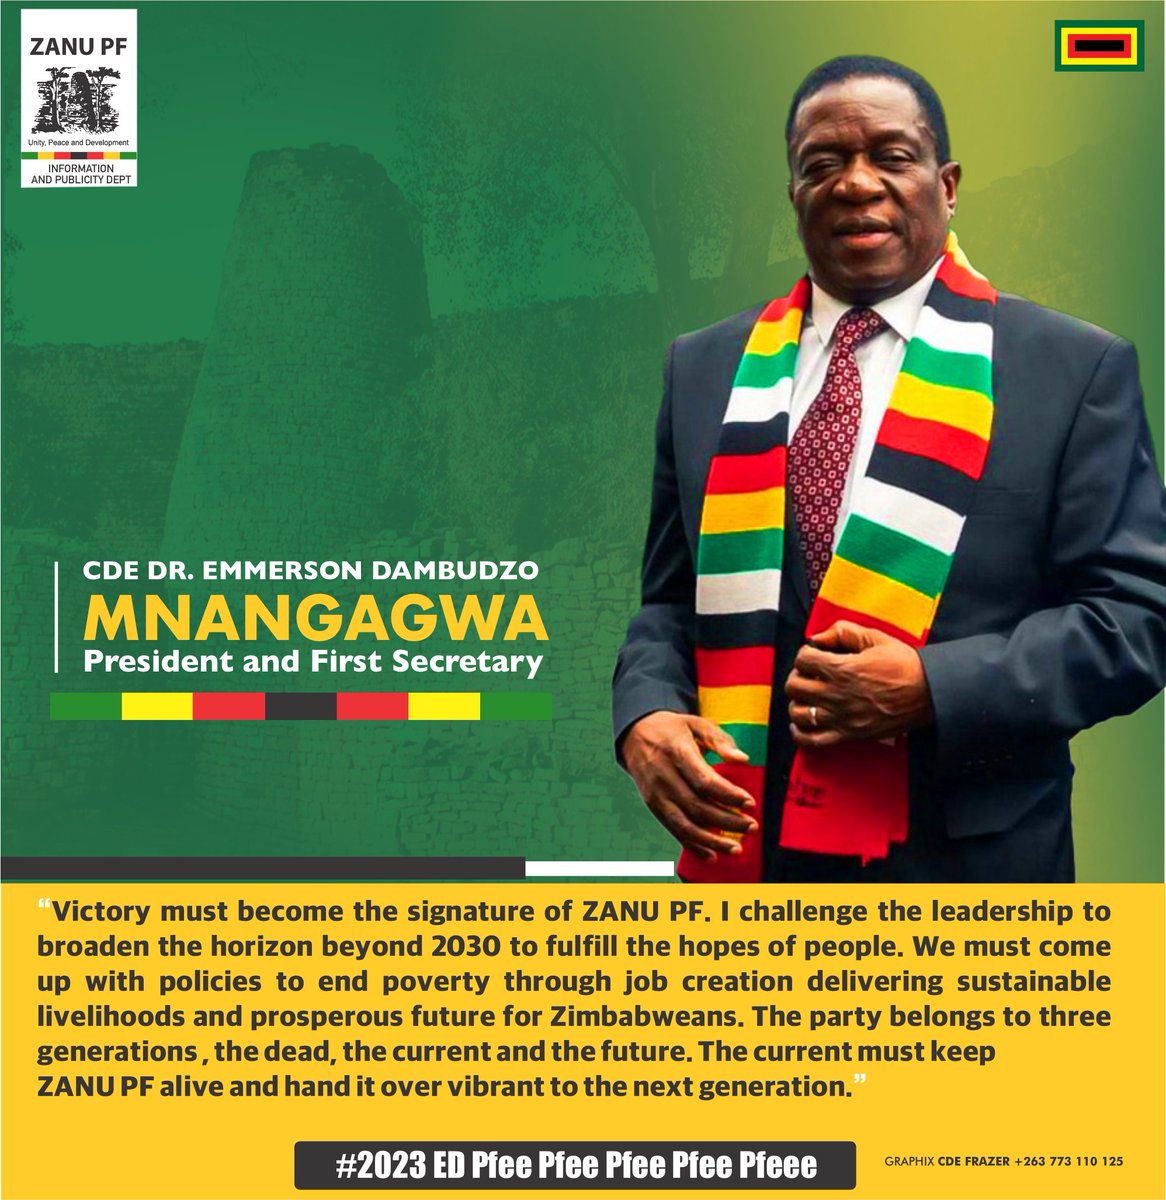 “Victory must become the signature of @ZANUPF_Official. I challenge the leadership to broaden the horizon beyond 2030 to fulfill the hopes of people. We must come up with policies to end poverty through job creation delivering sustainable livelihoods and prosperous future for Zim